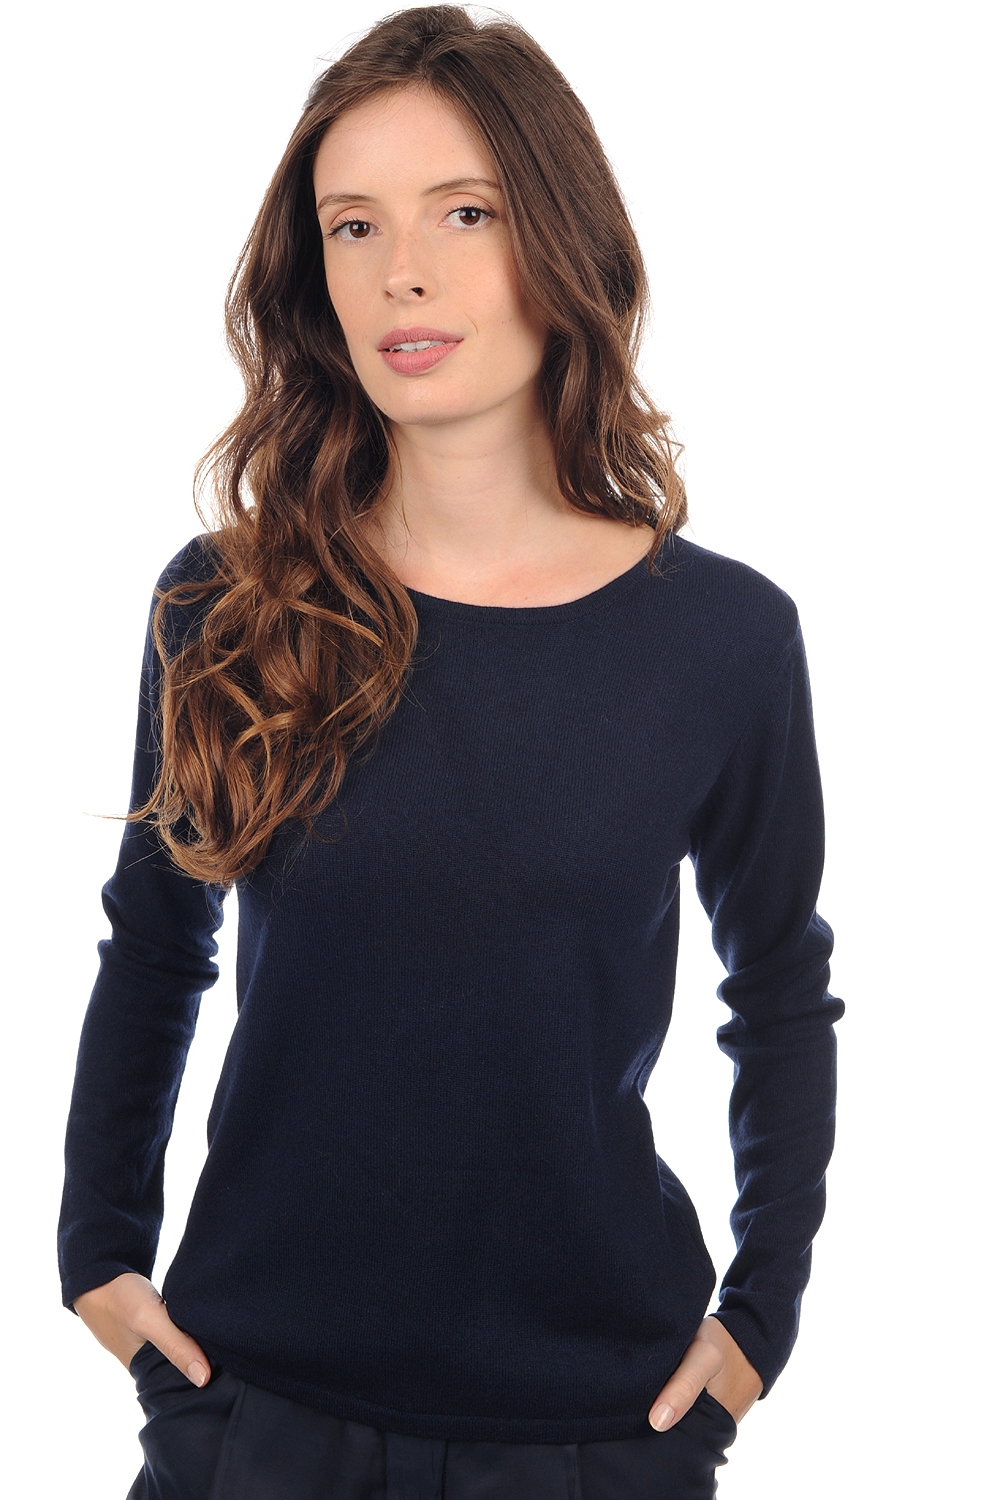 Cachemire pull femme col rond solange marine fonce 2xl